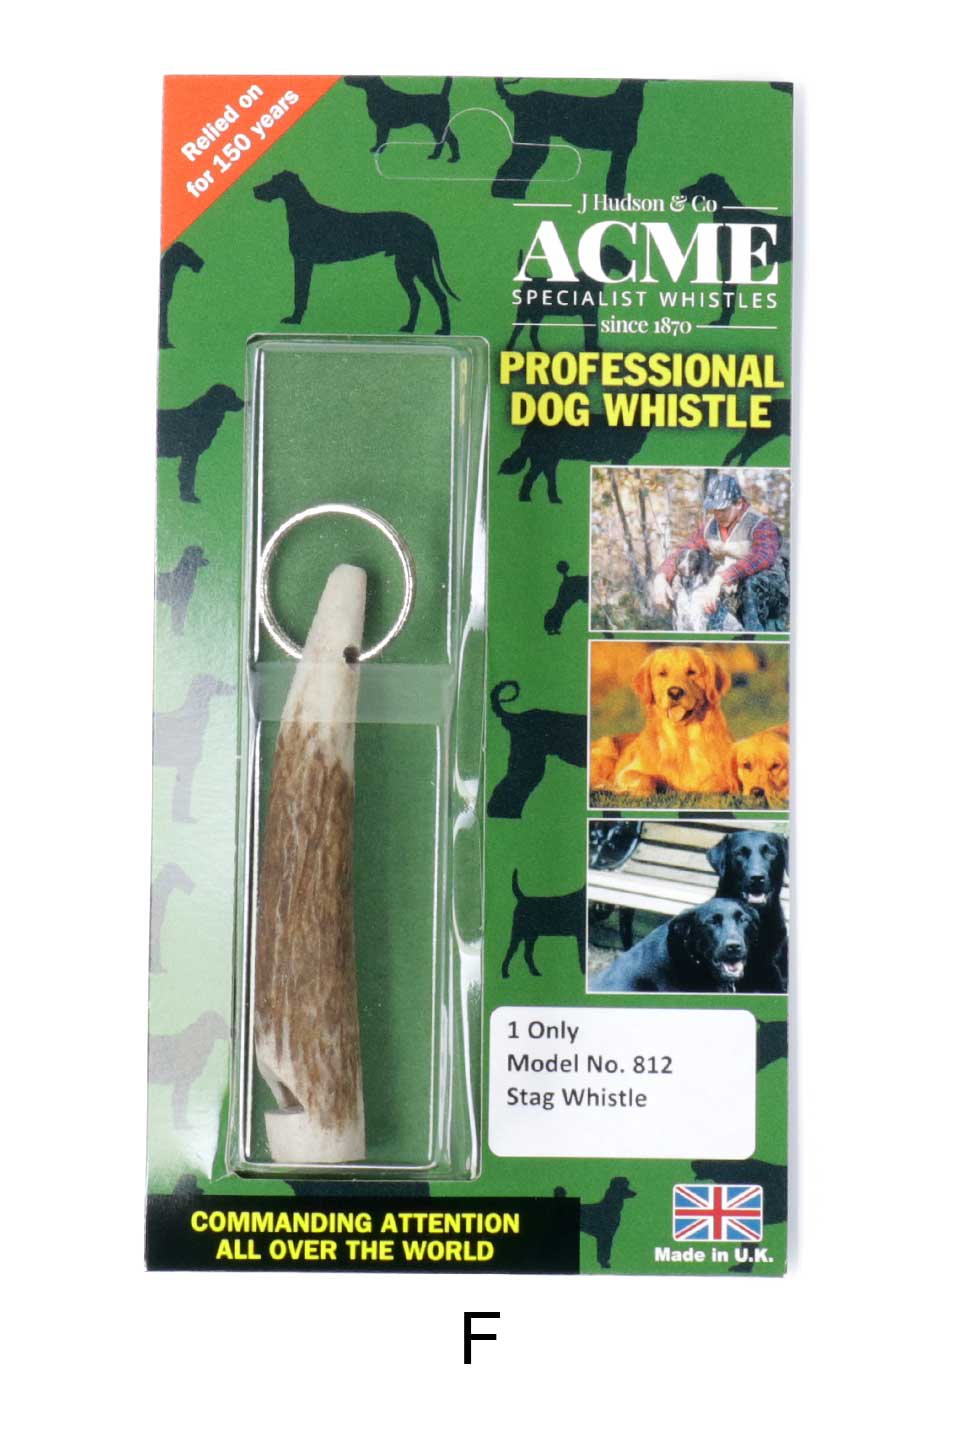 Stag Horn Whistle 2-Tone 鹿角製・２トーンドッグホイッスル / Acme